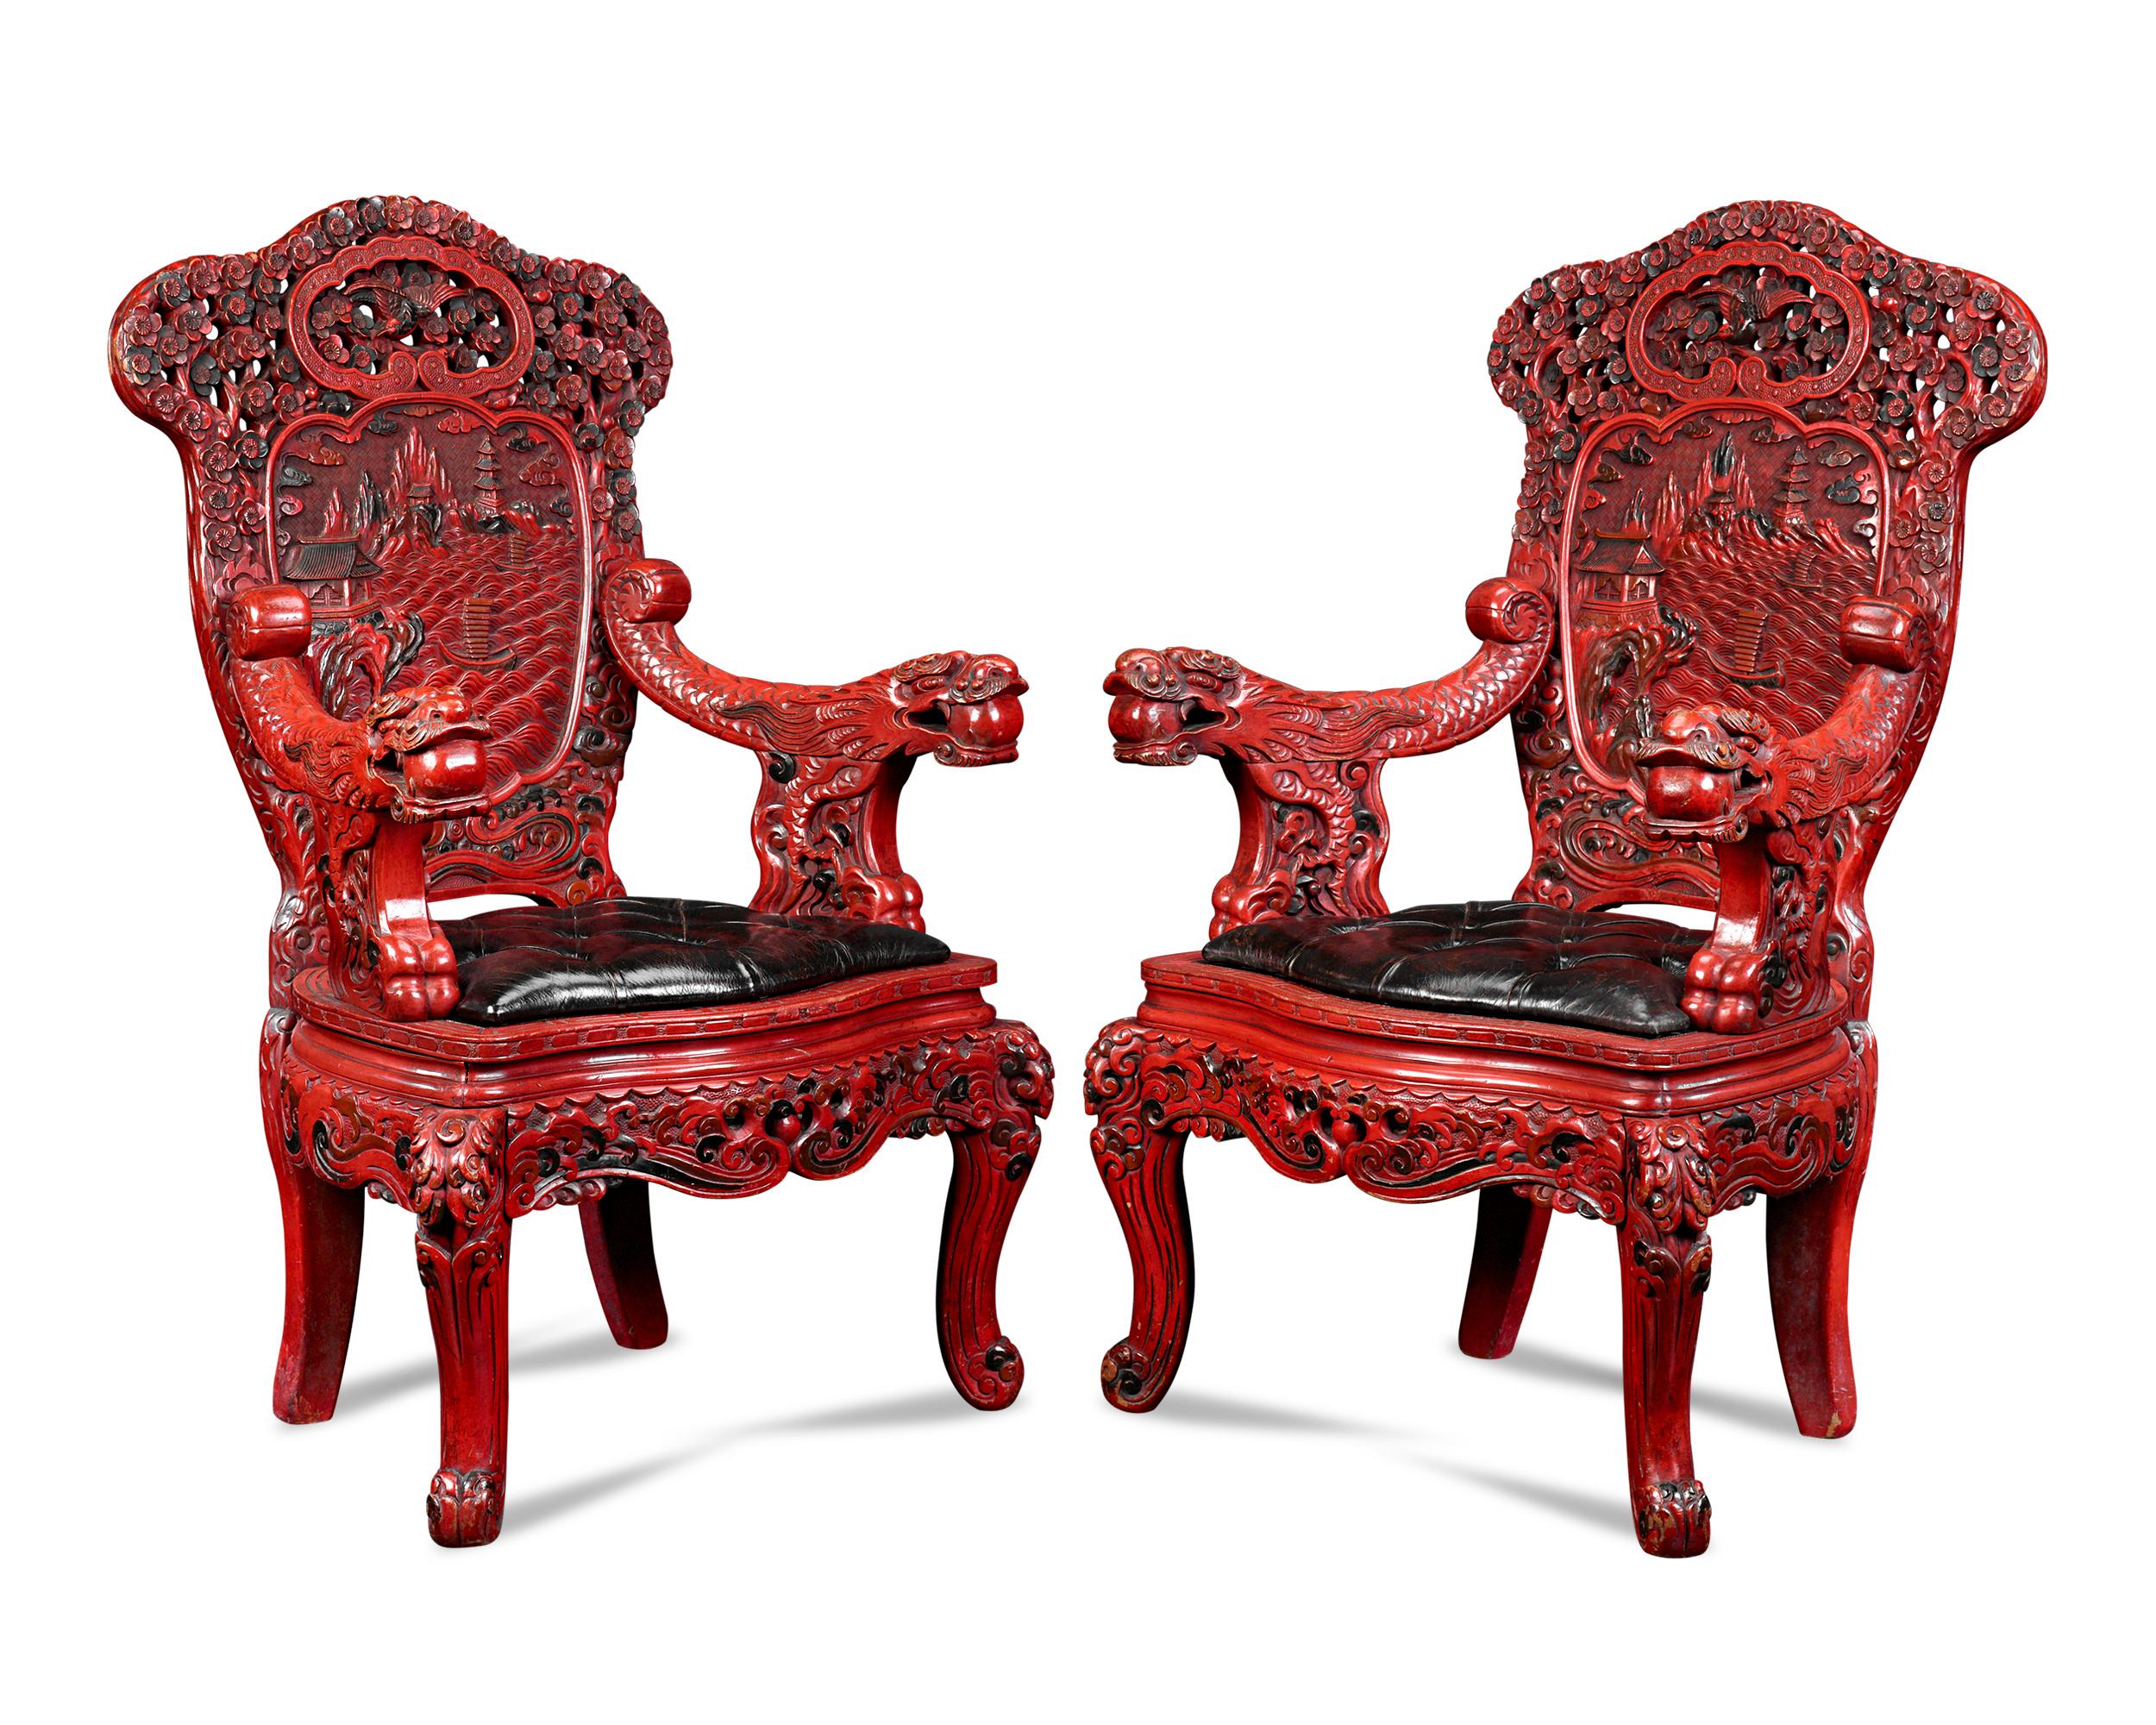 These breathtaking Chinese throne chairs hailing from the late Qing dynasty are each elaborately carved of wood and covered in sumptuous red and black lacquer. Every inch of the pair is carved with Chinese motifs including scrollwork and cherry